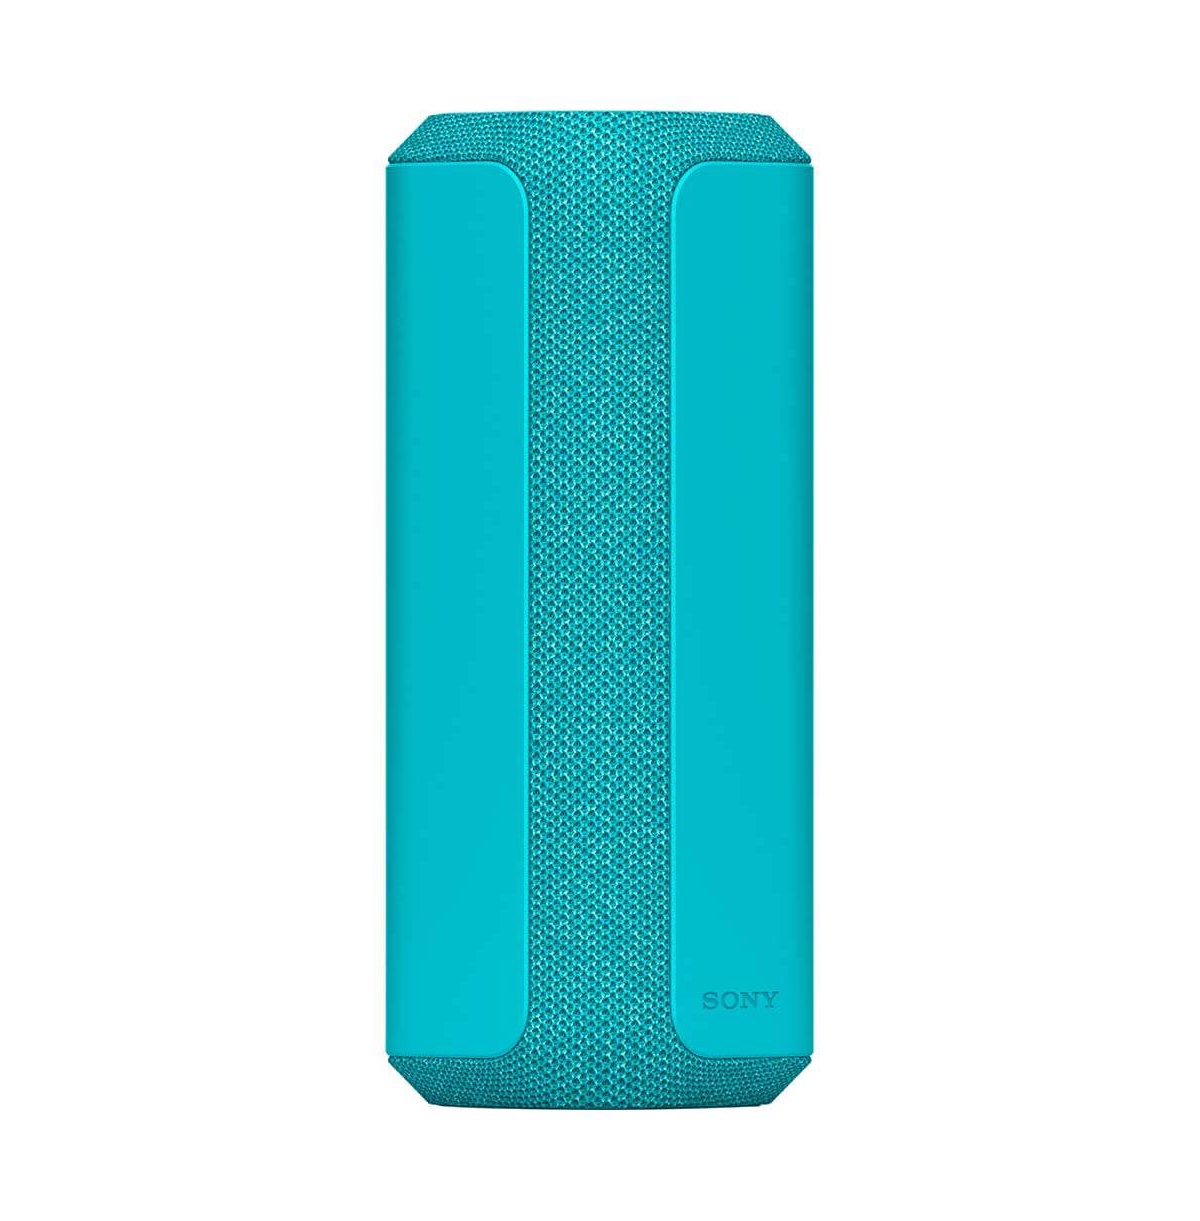 Sony Blue Portable X-series Bluetooth Speaker In Bright Blue